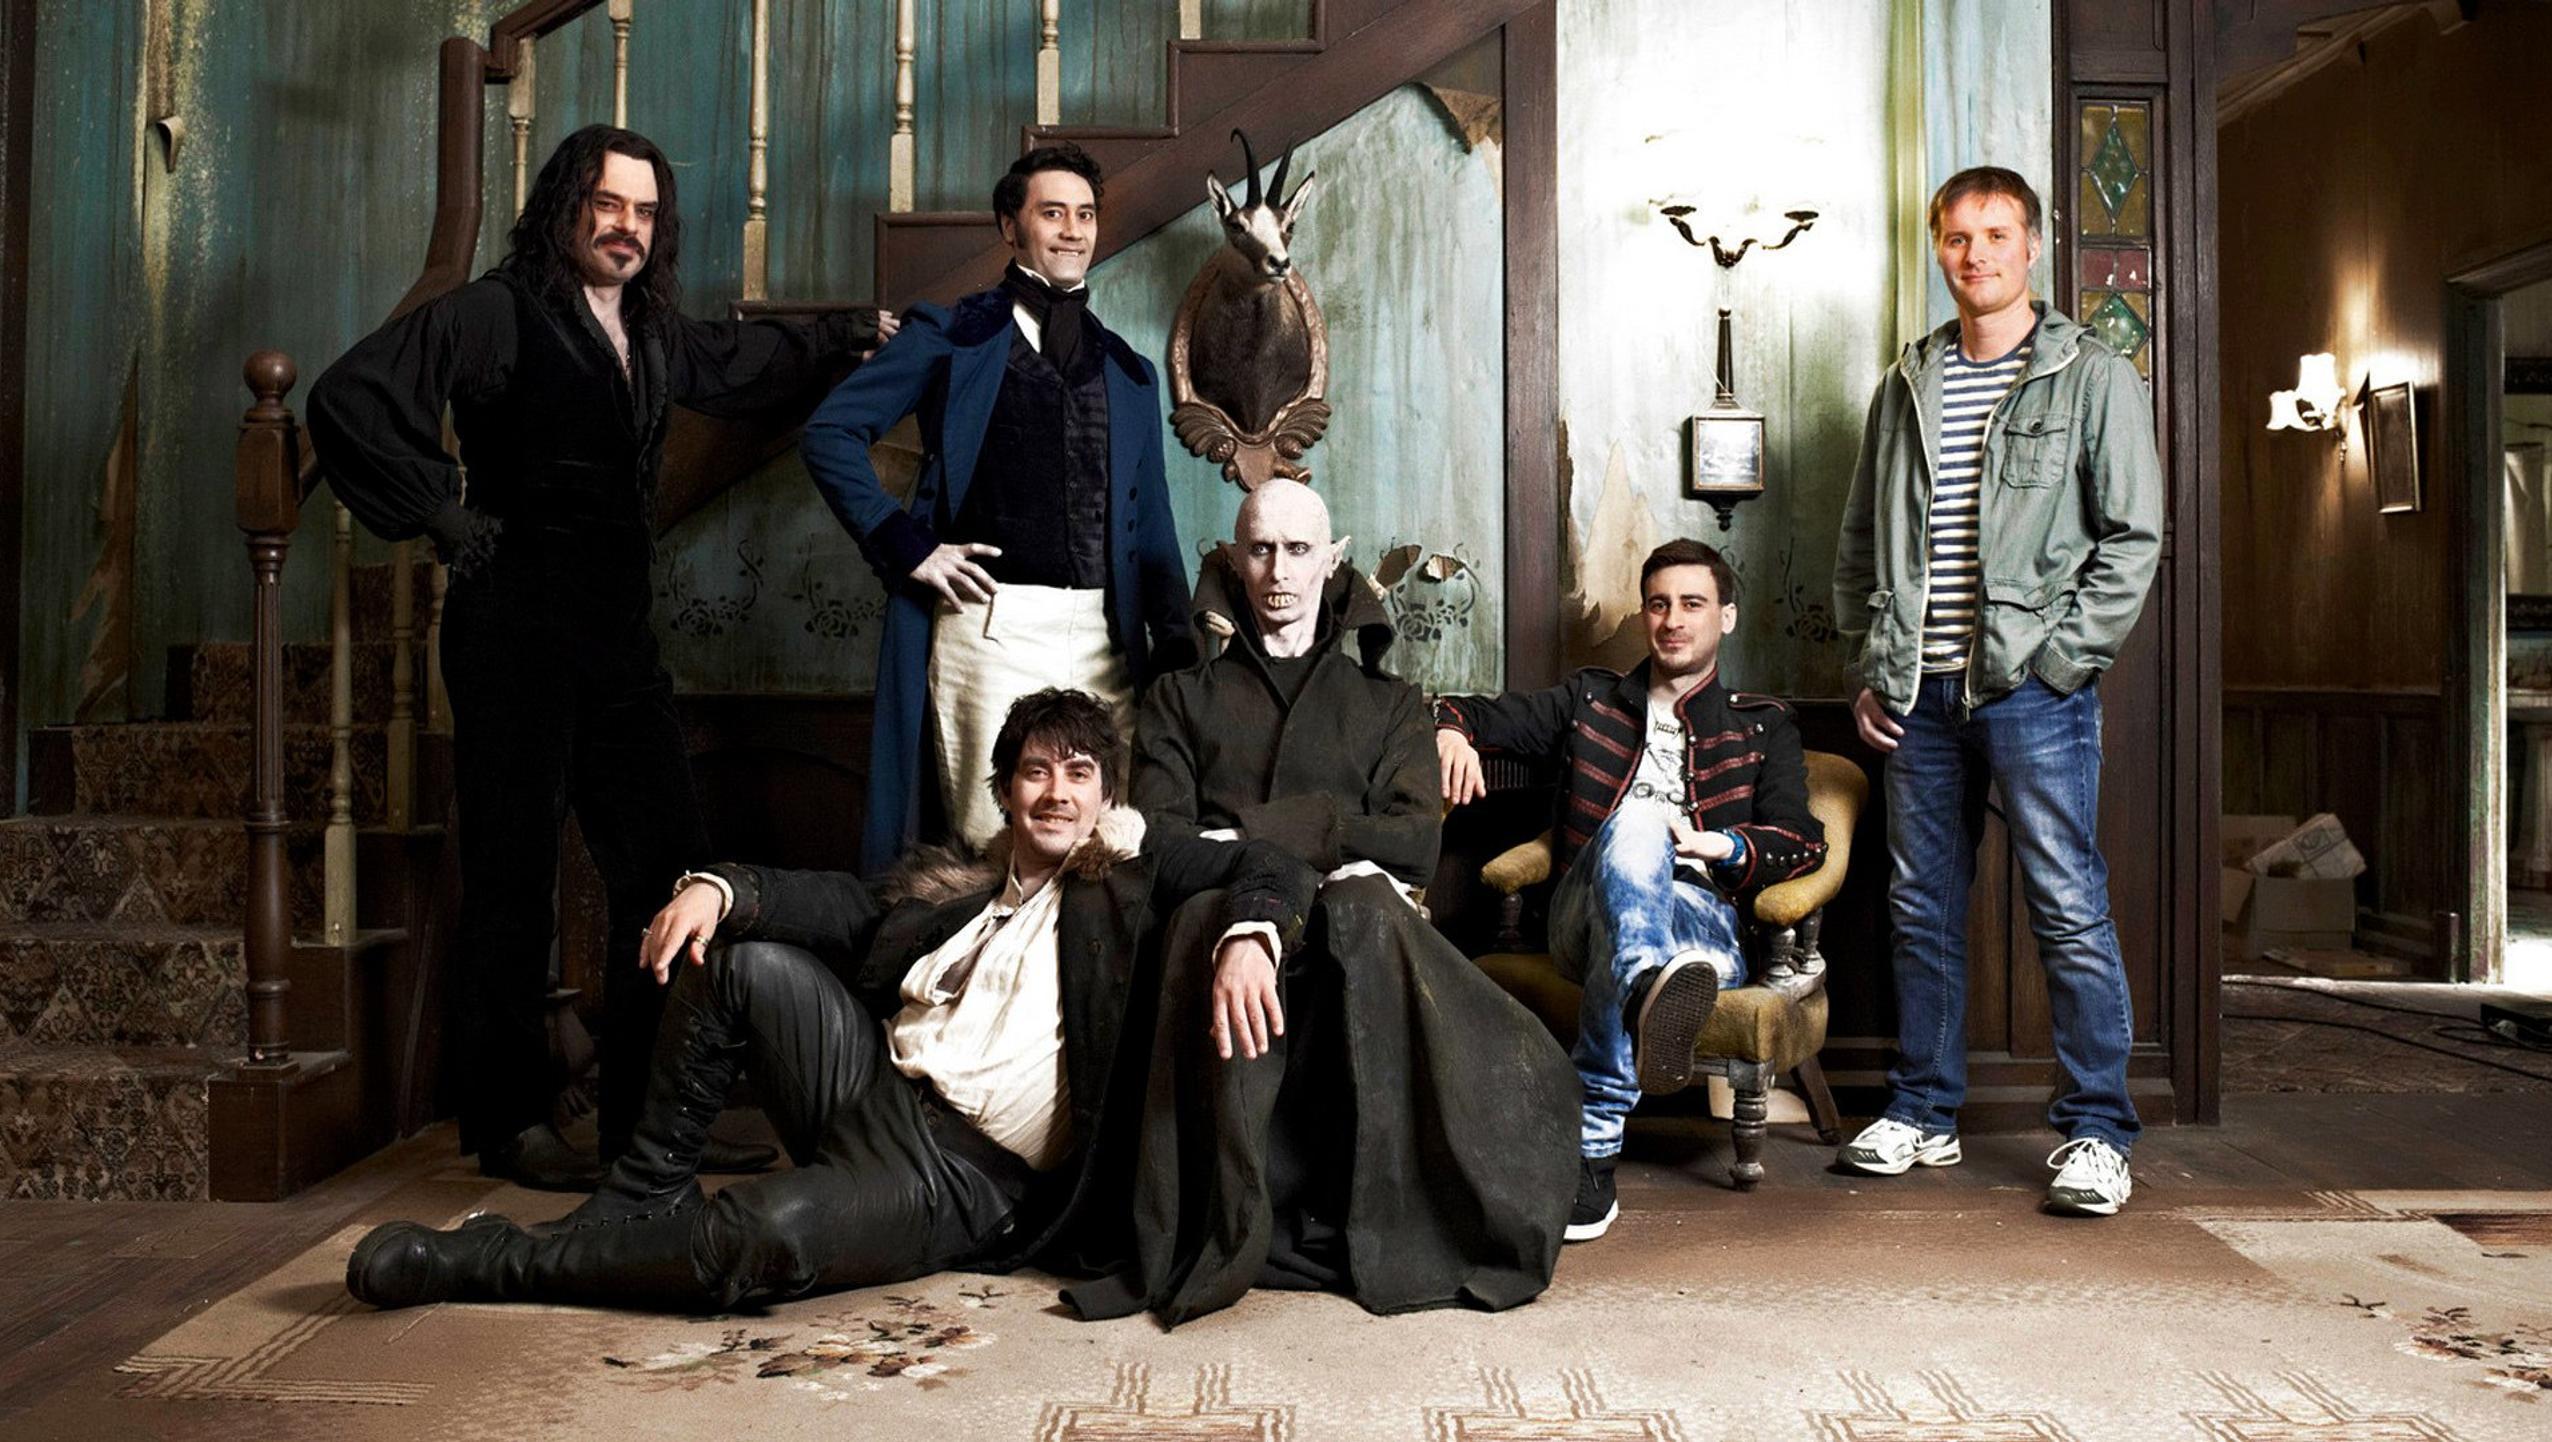 What We Do in the Shadows (2014) Desktop Wallpaper